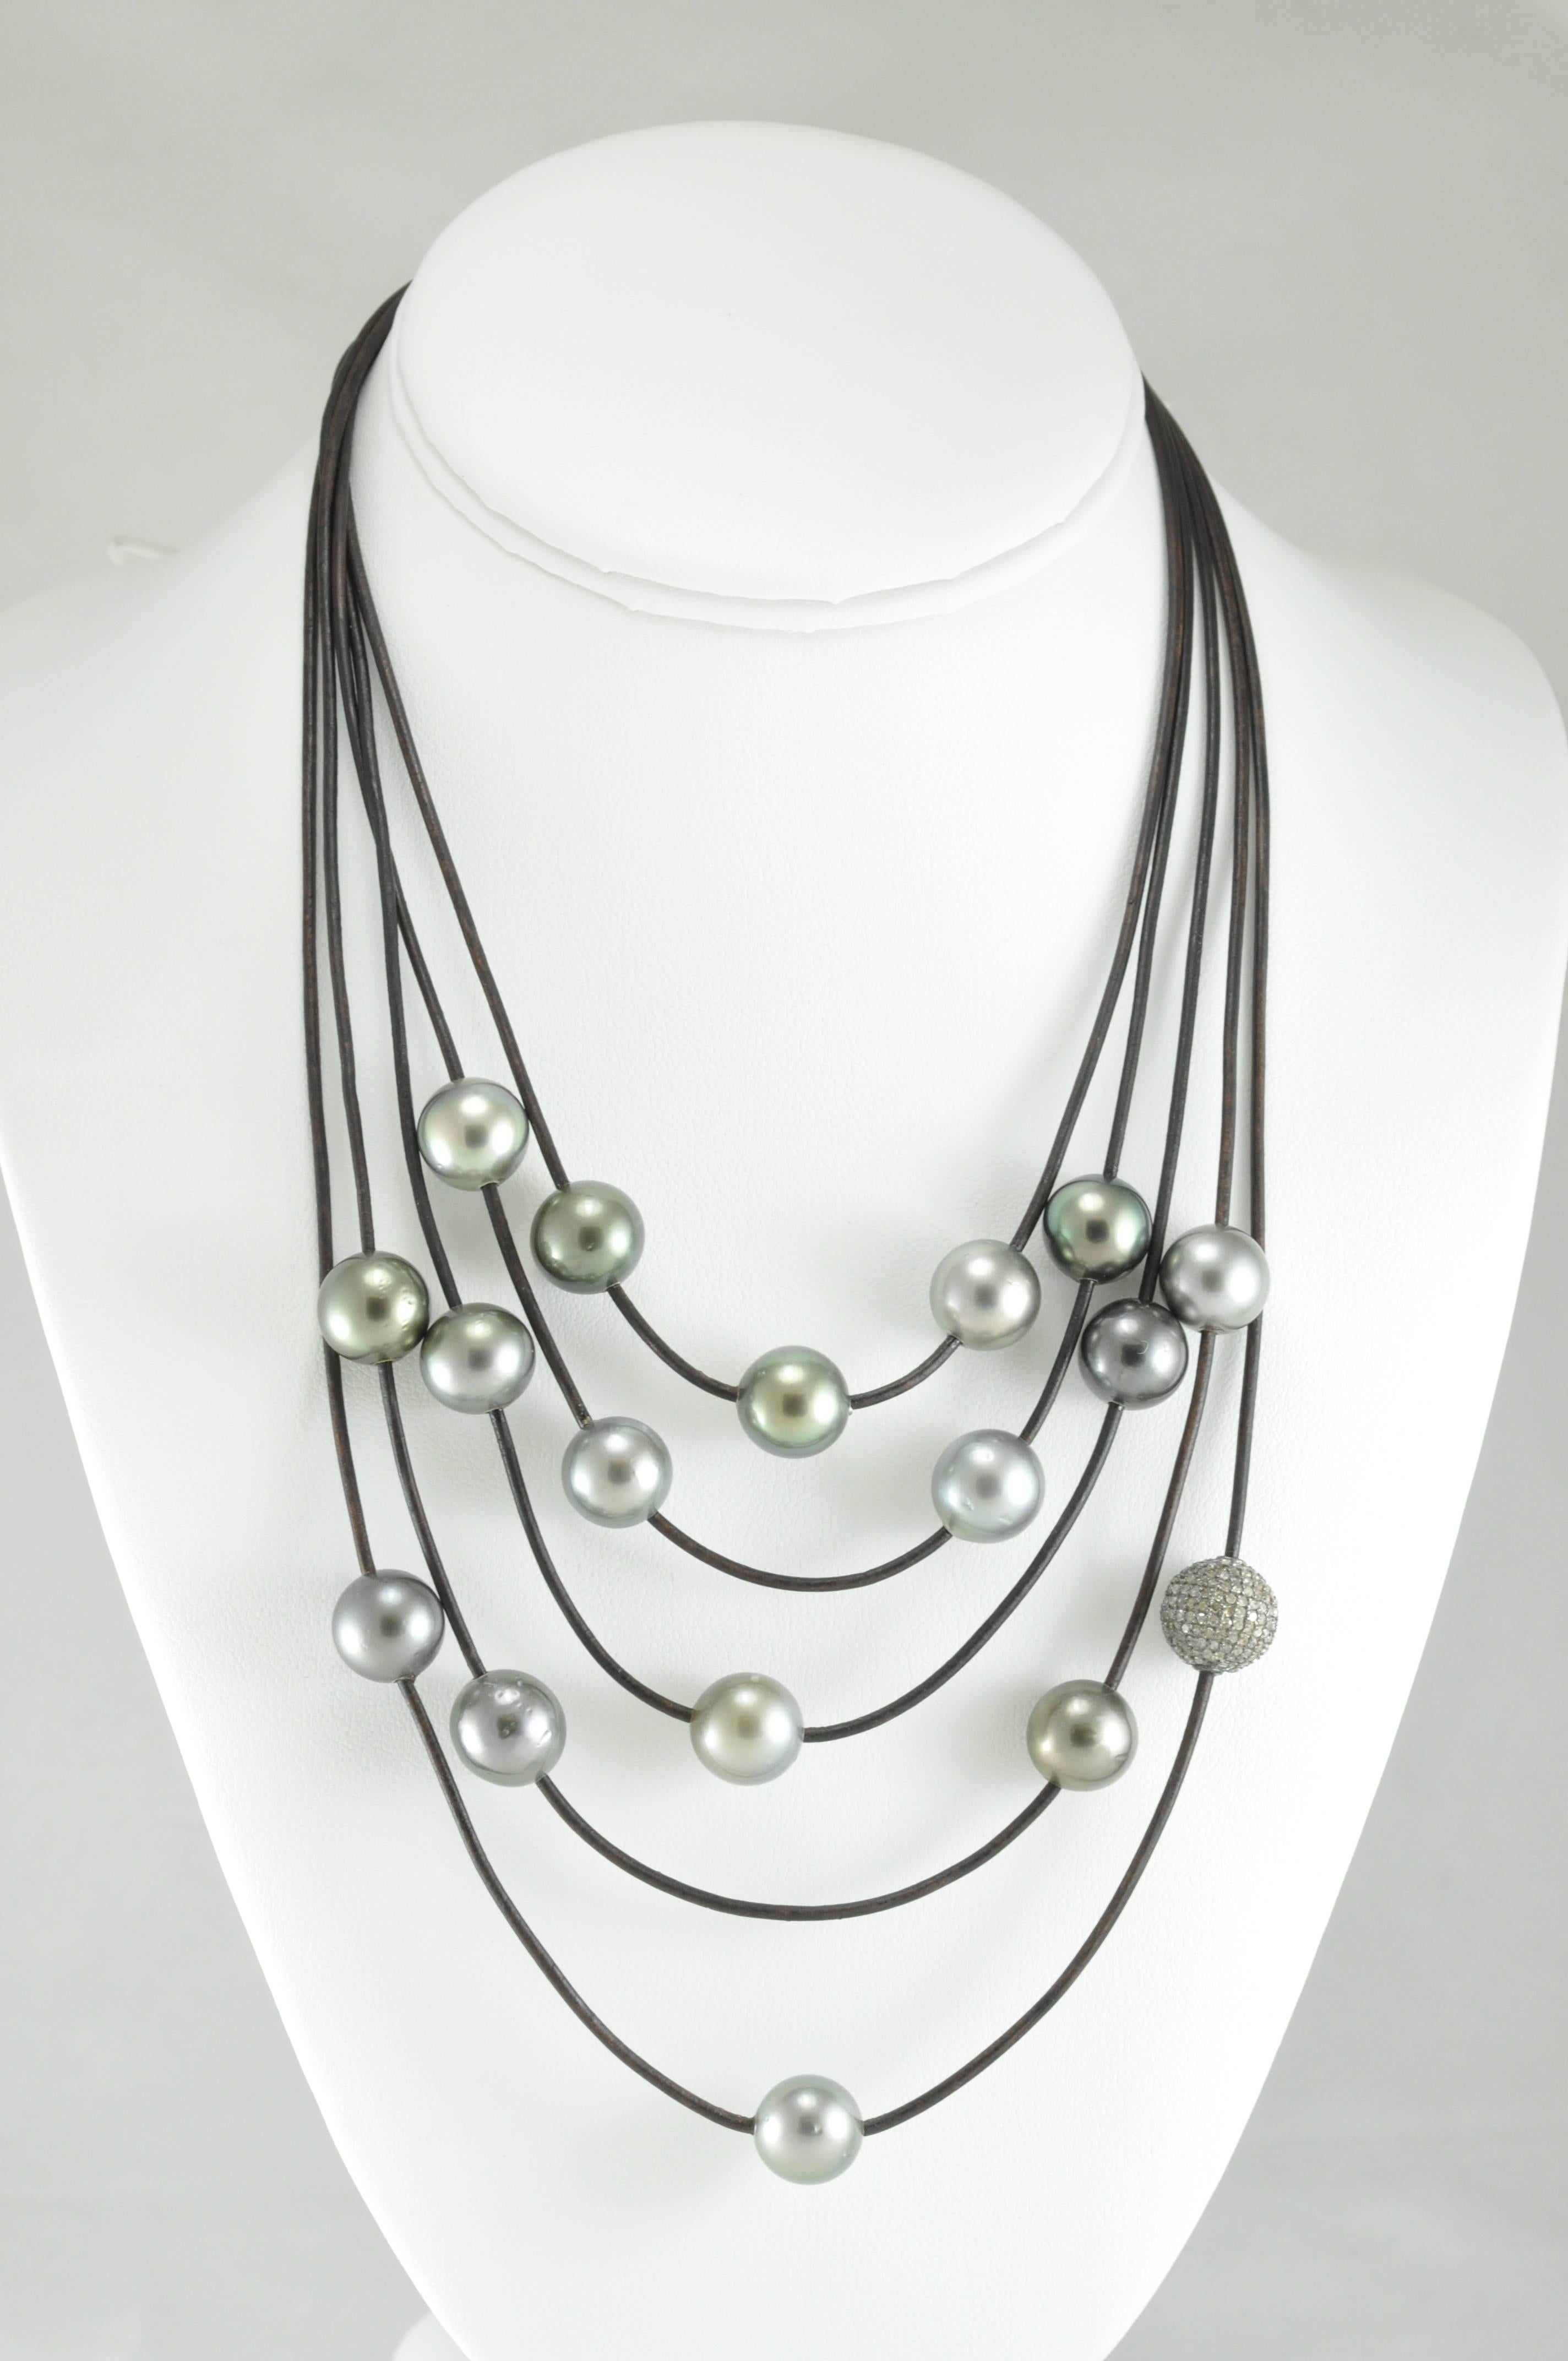 Beautiful 5-strand Tahitian pearl and Leather necklace, one strand with diamond pave pod. This necklace is beautiful when dressed up or down and feels comfortable when worn either way. Fits in at a barbeque, or a lovely dinner out.
Shortest strand